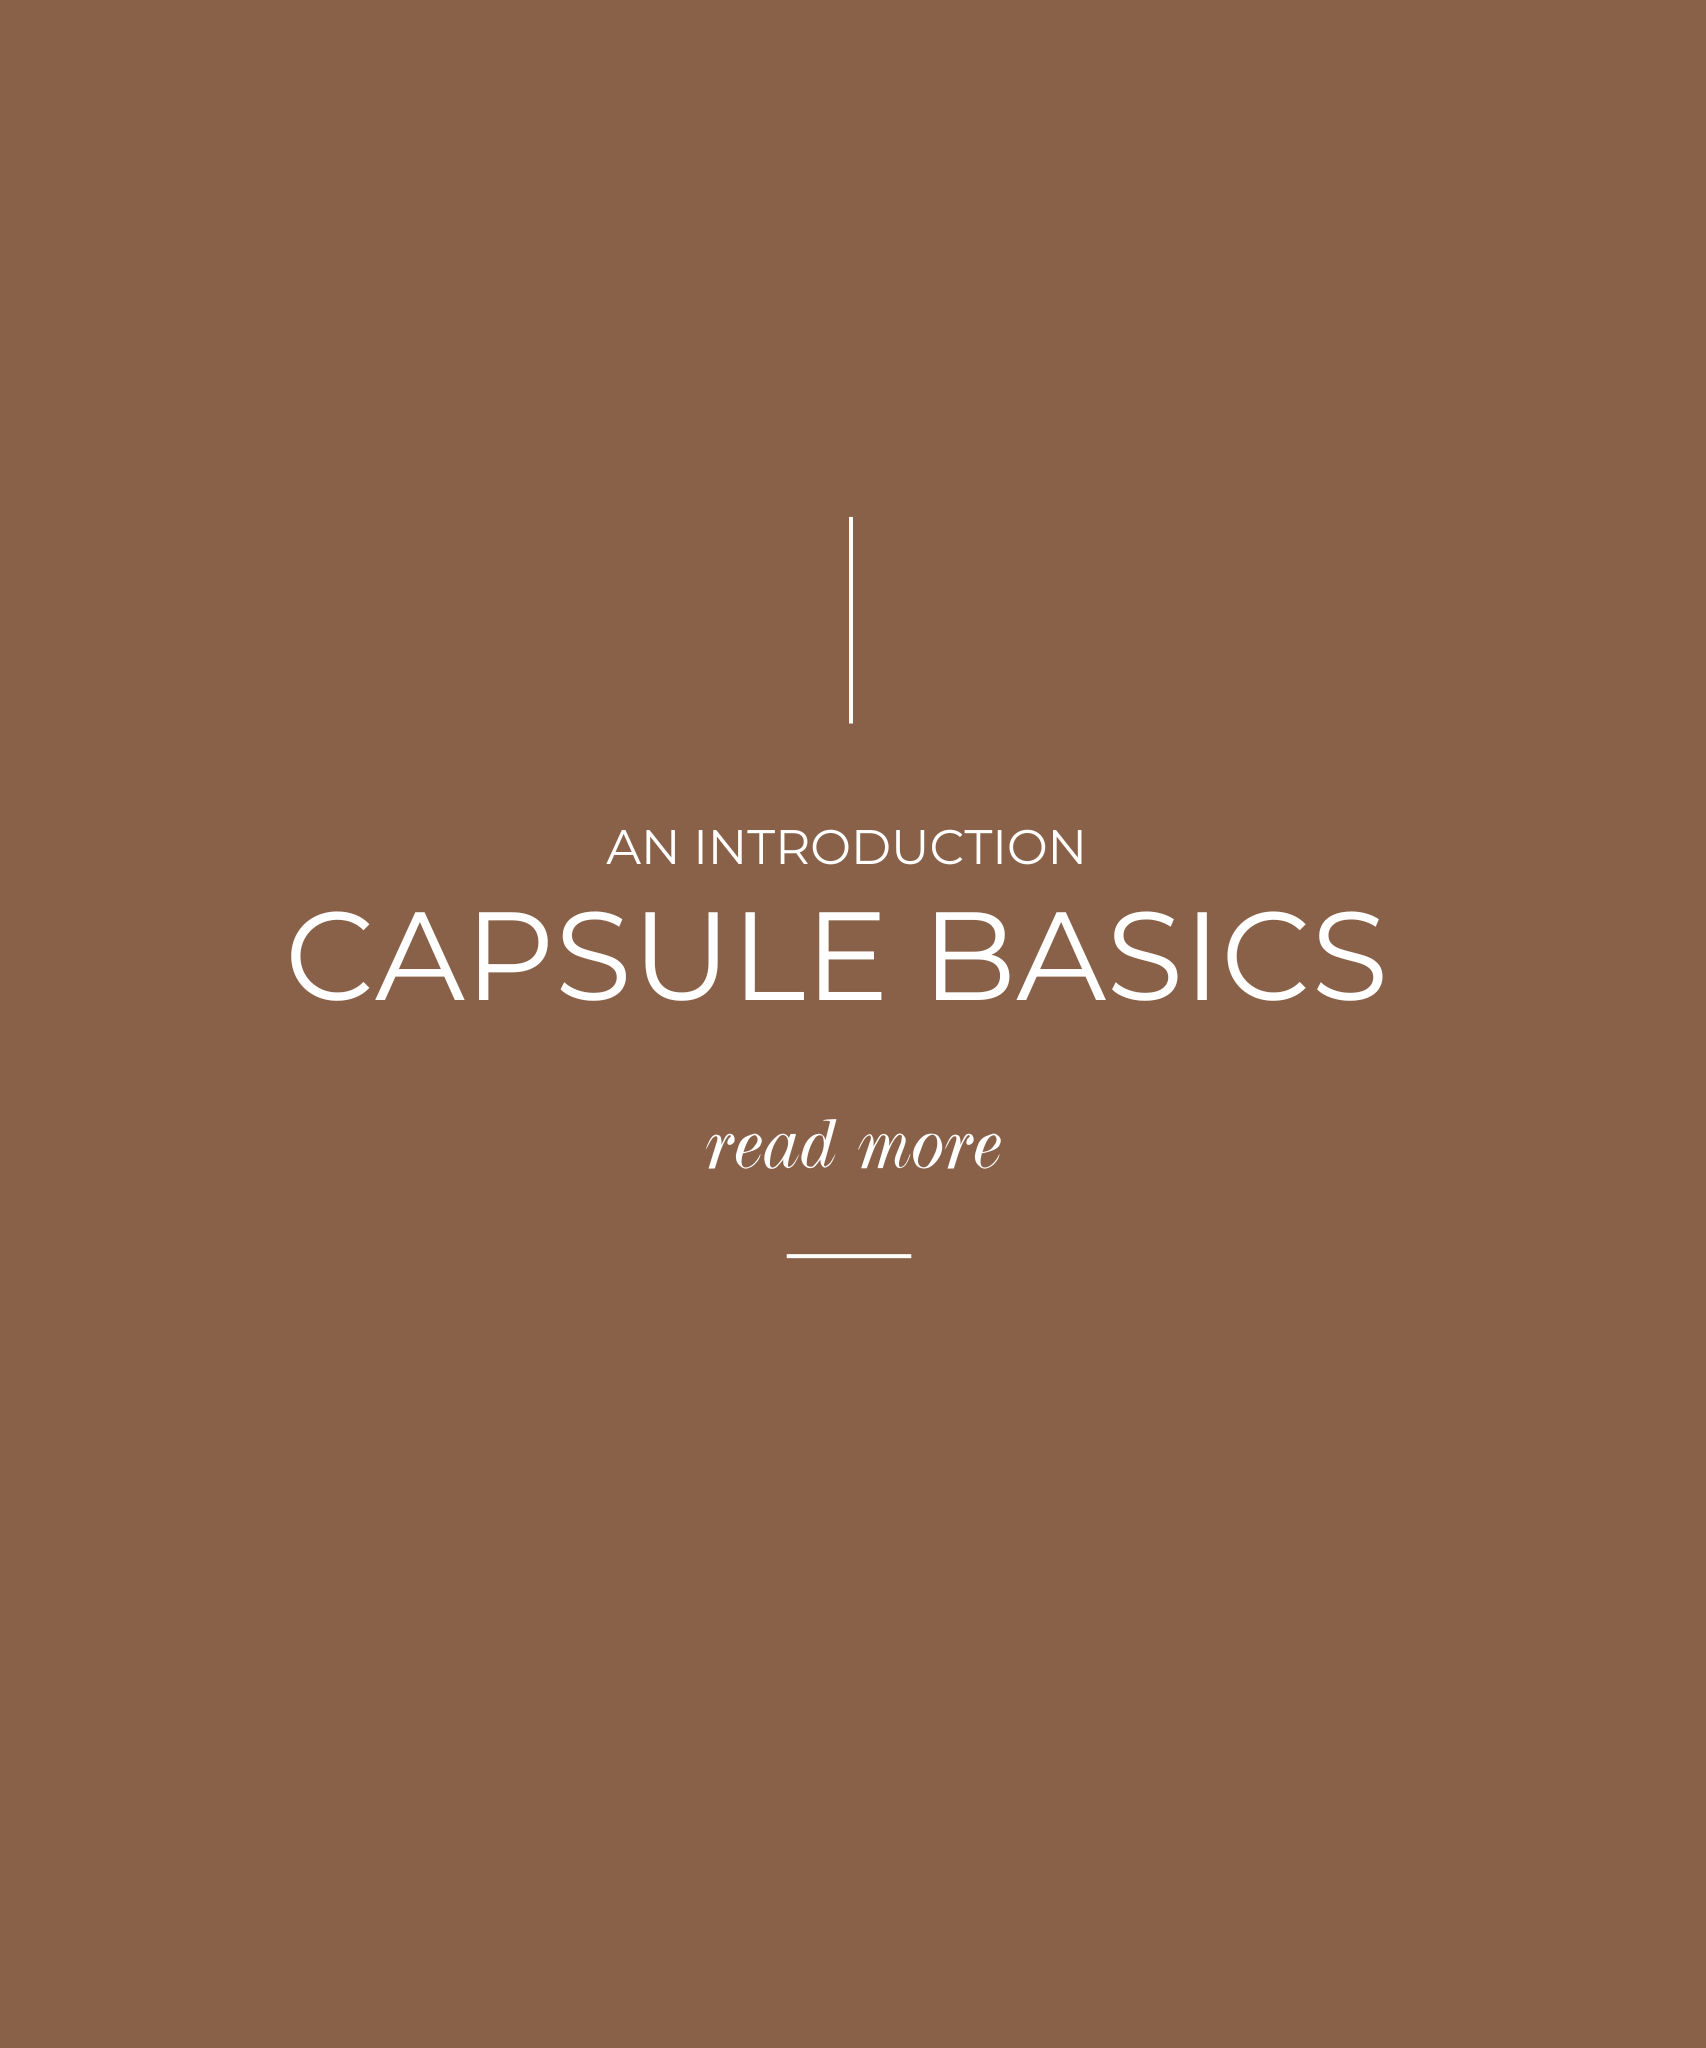 A Curated Capsule: The Basics